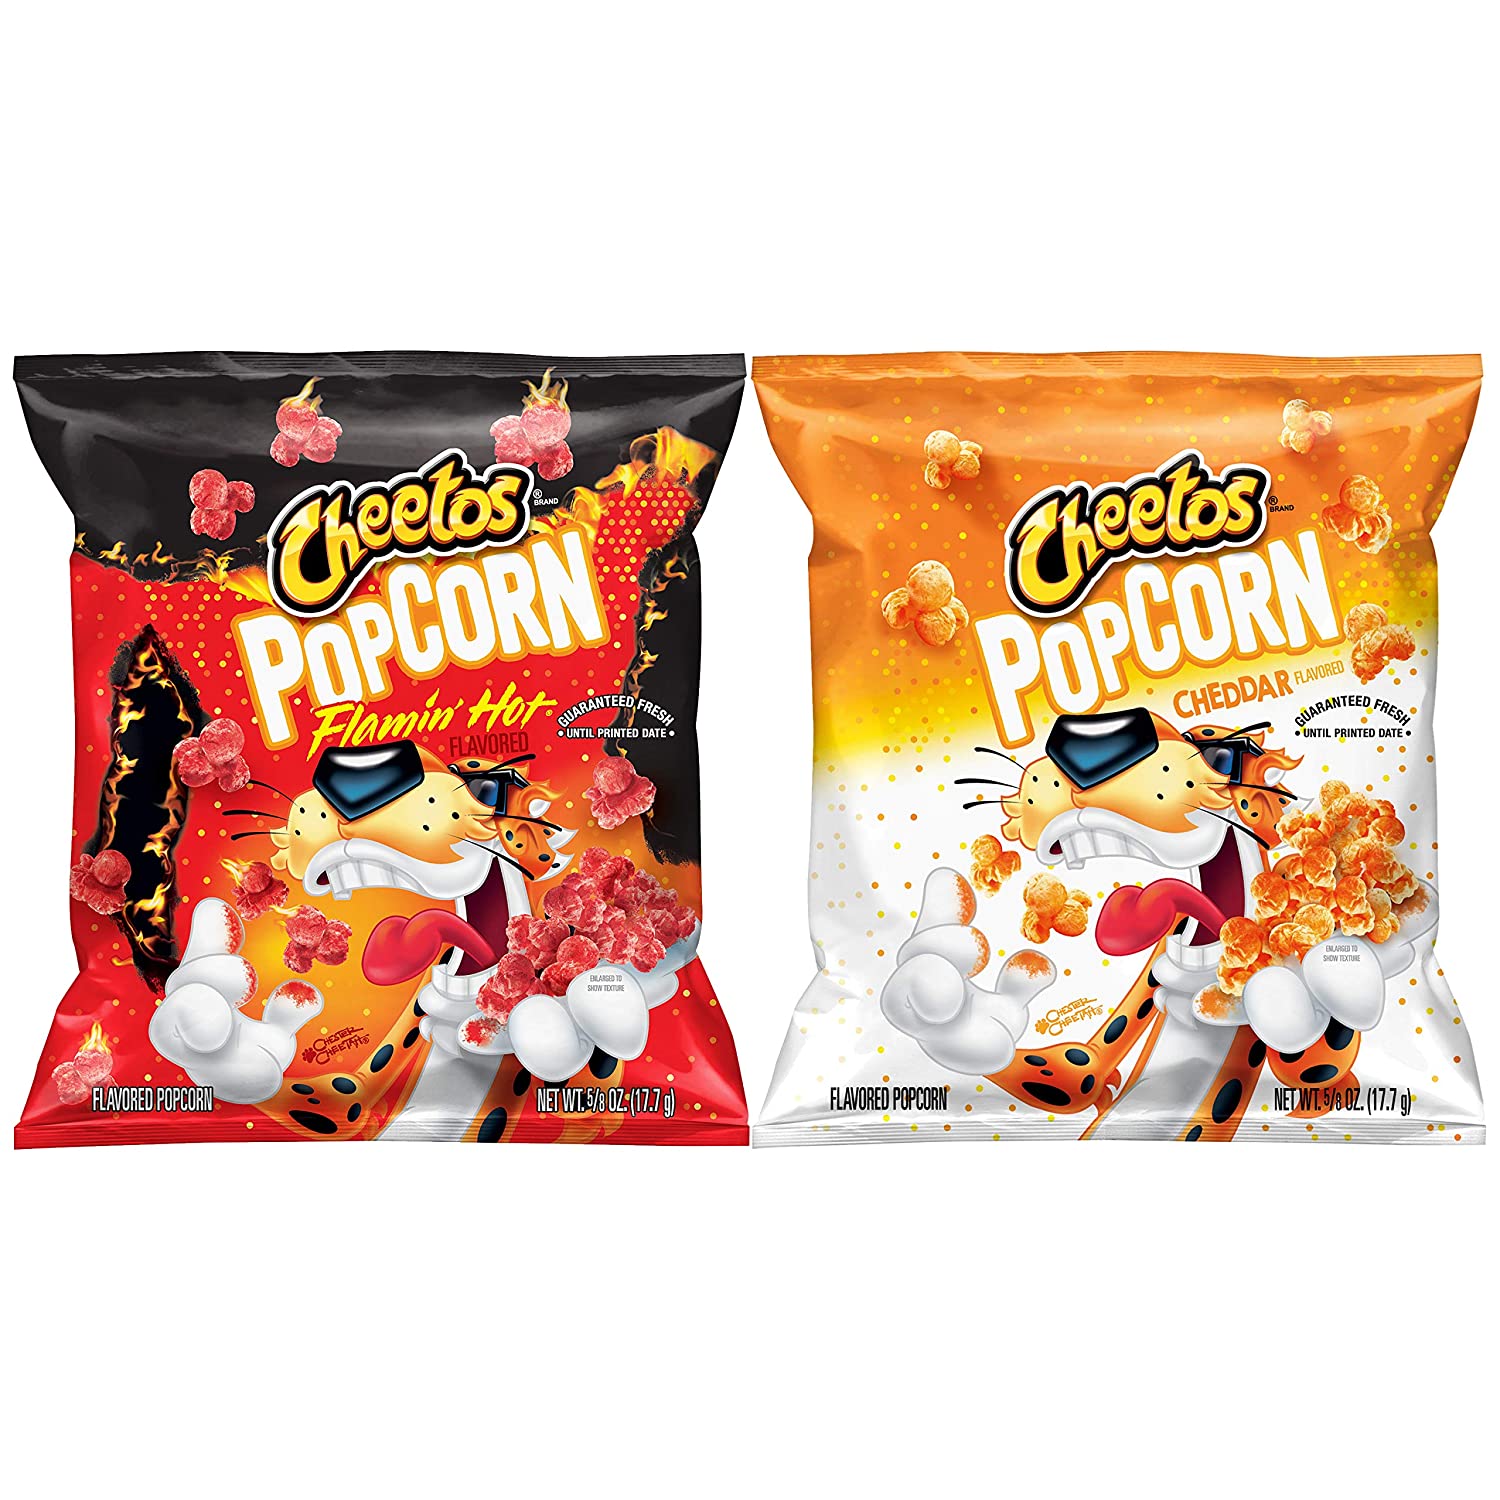 40-Pack 0.625oz Cheetos Popcorn Variety Pack (Cheddar & Flamin' Hot) $9.79 w/ S&S + Free Shipping w/ Prime or on $25+